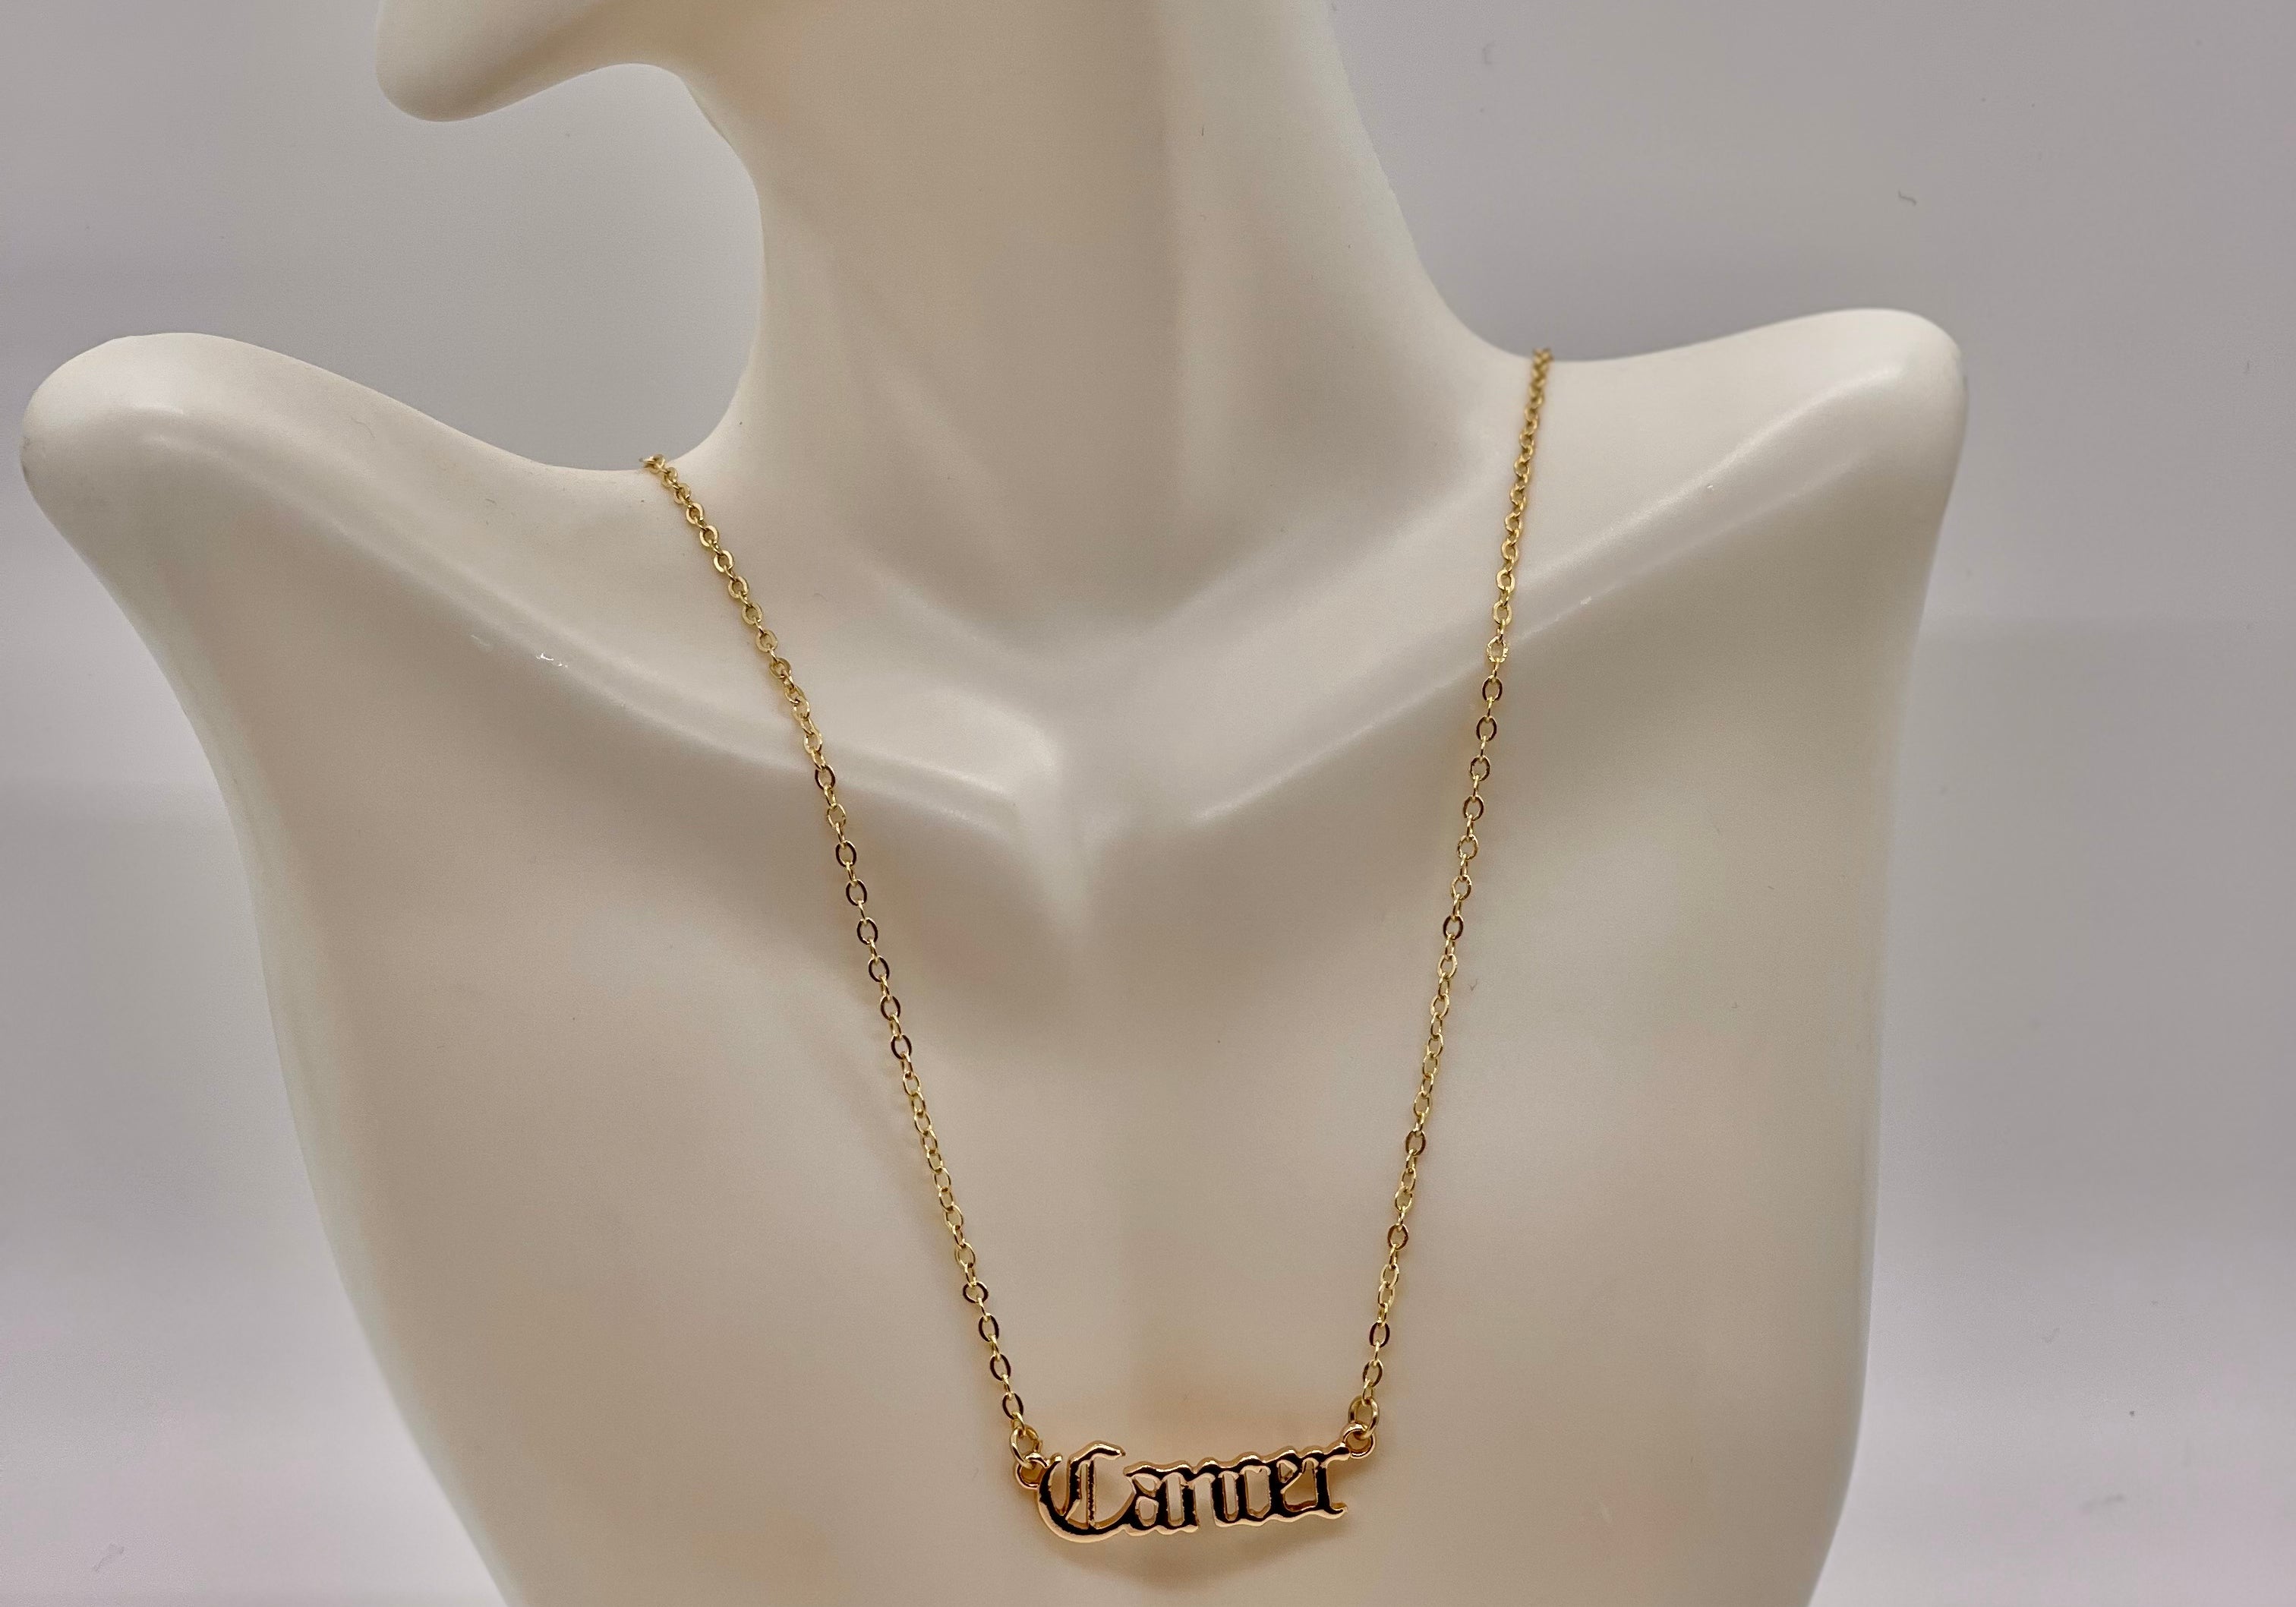 What's Your Sign Zodiac Name Necklace - Bodacious Bijous Cancer Gold